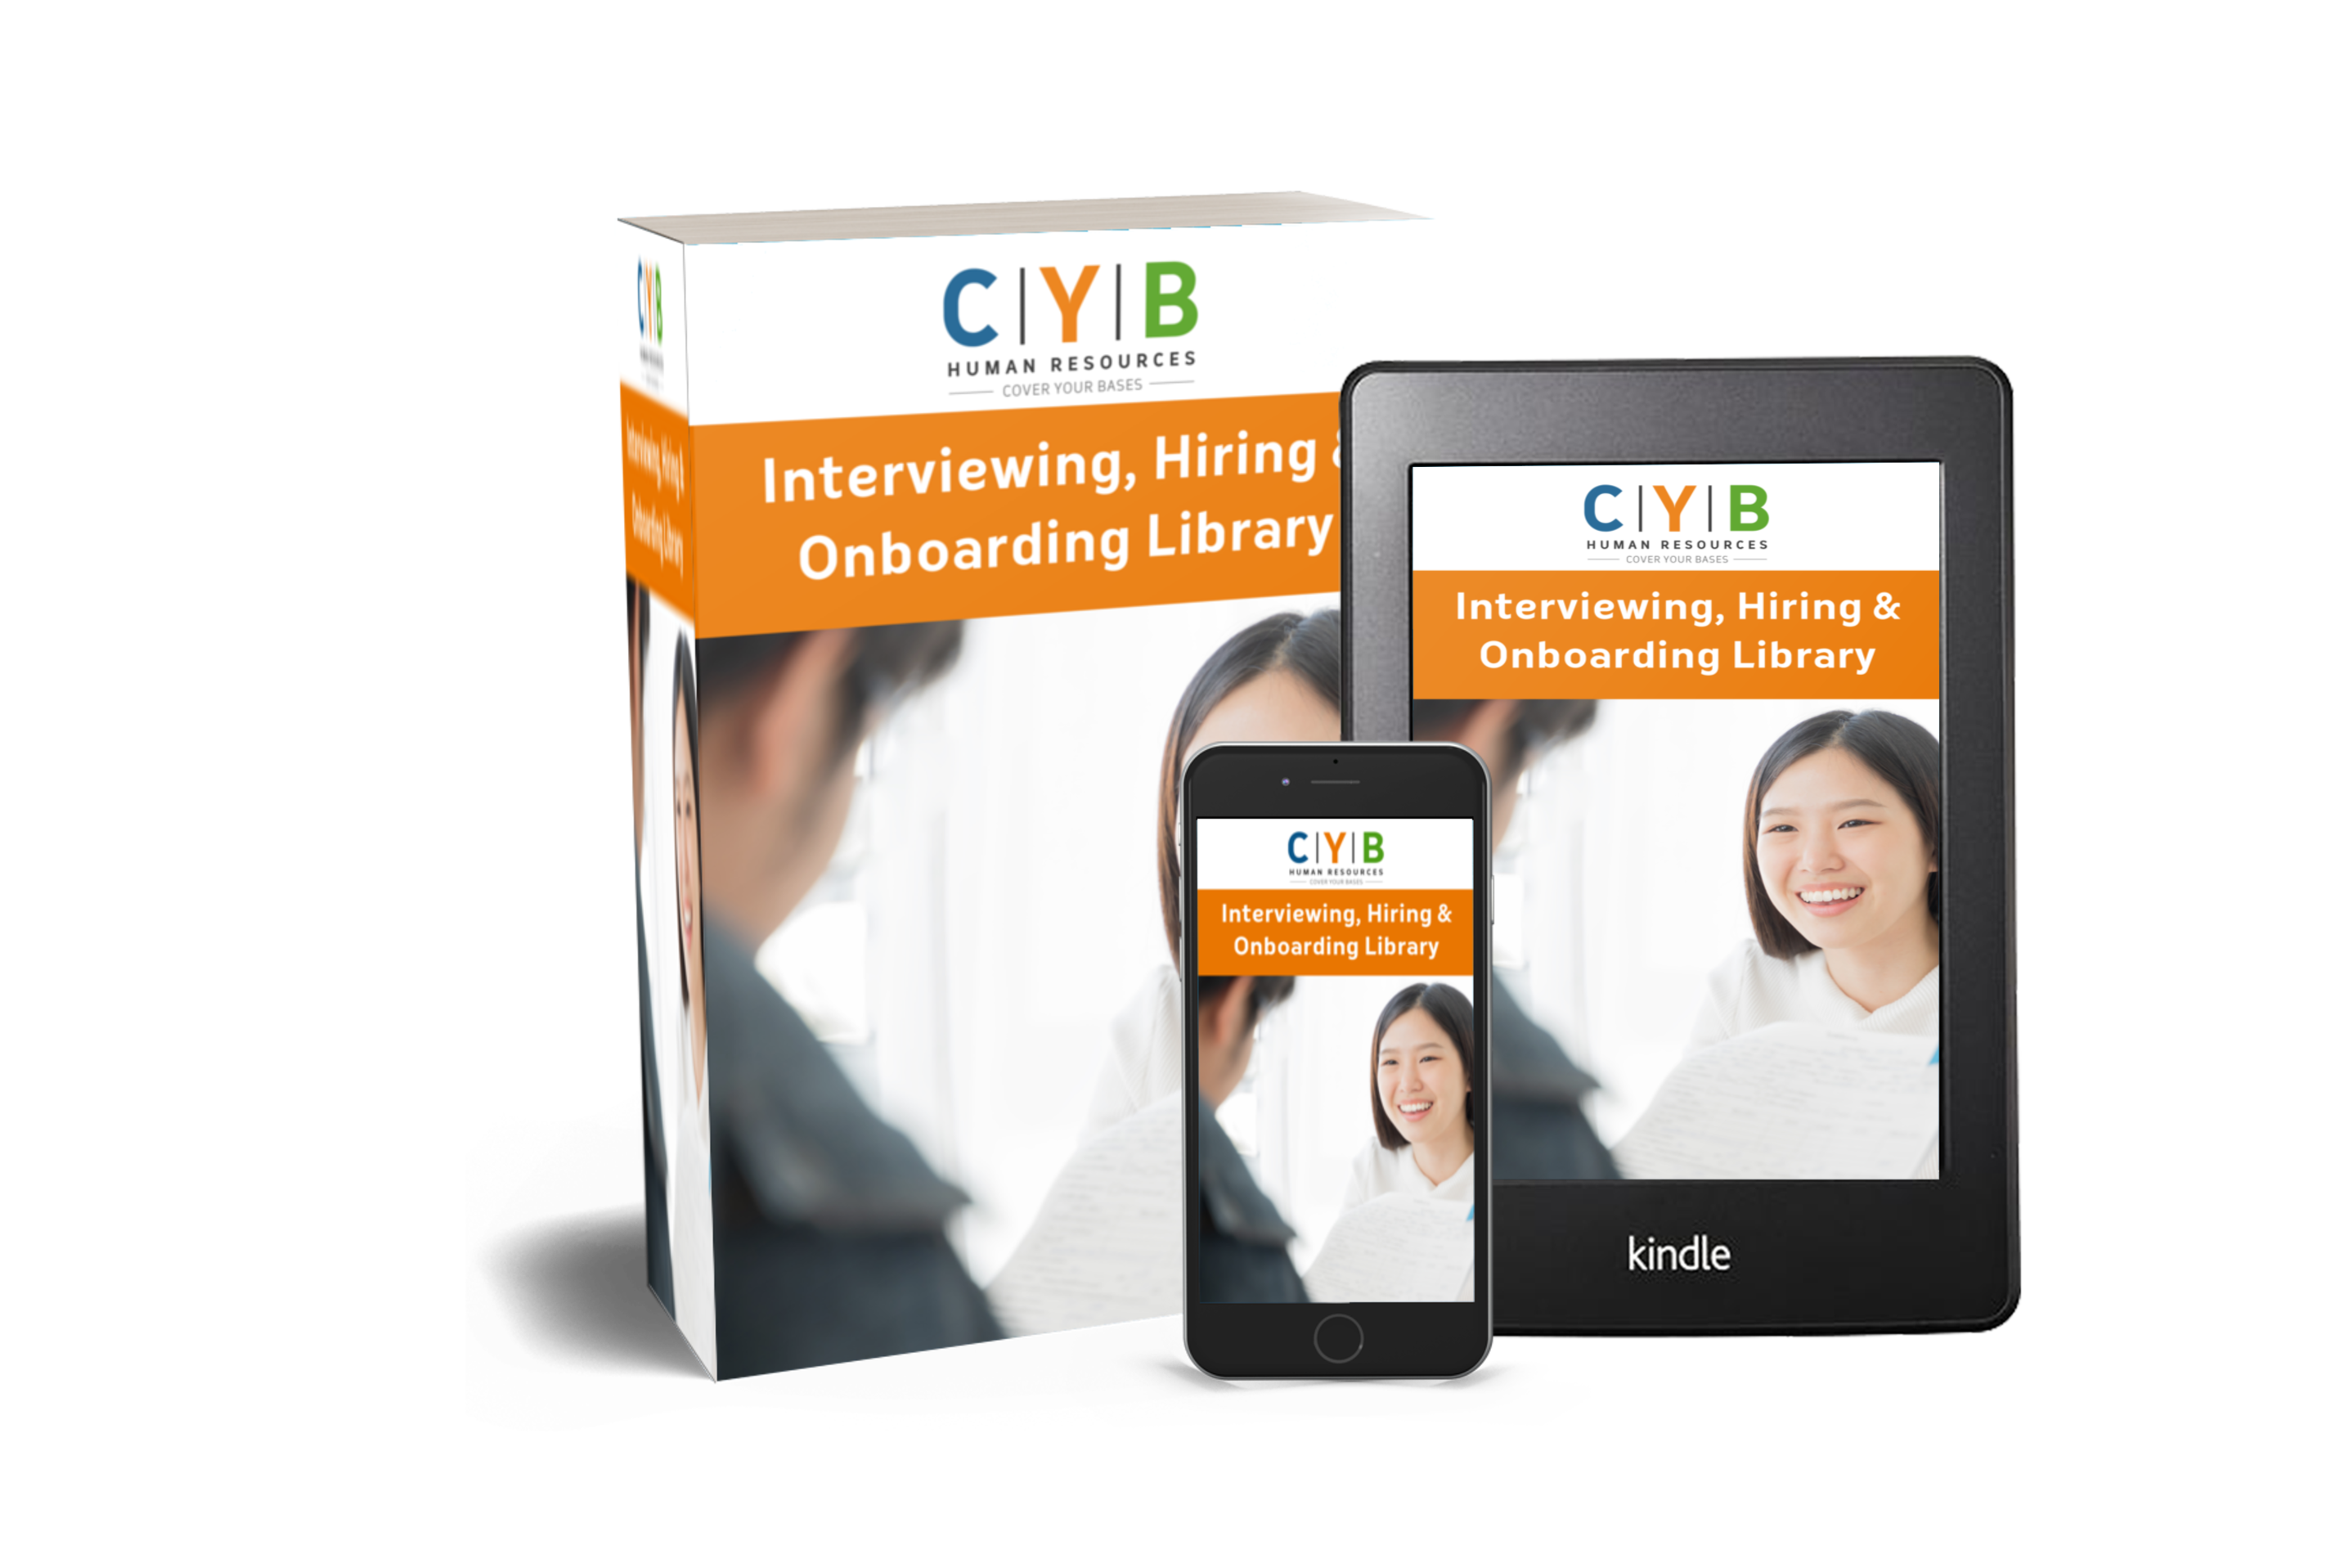 CYB Human Resources Download Library Interviewing, Hiring & Onboarding Library